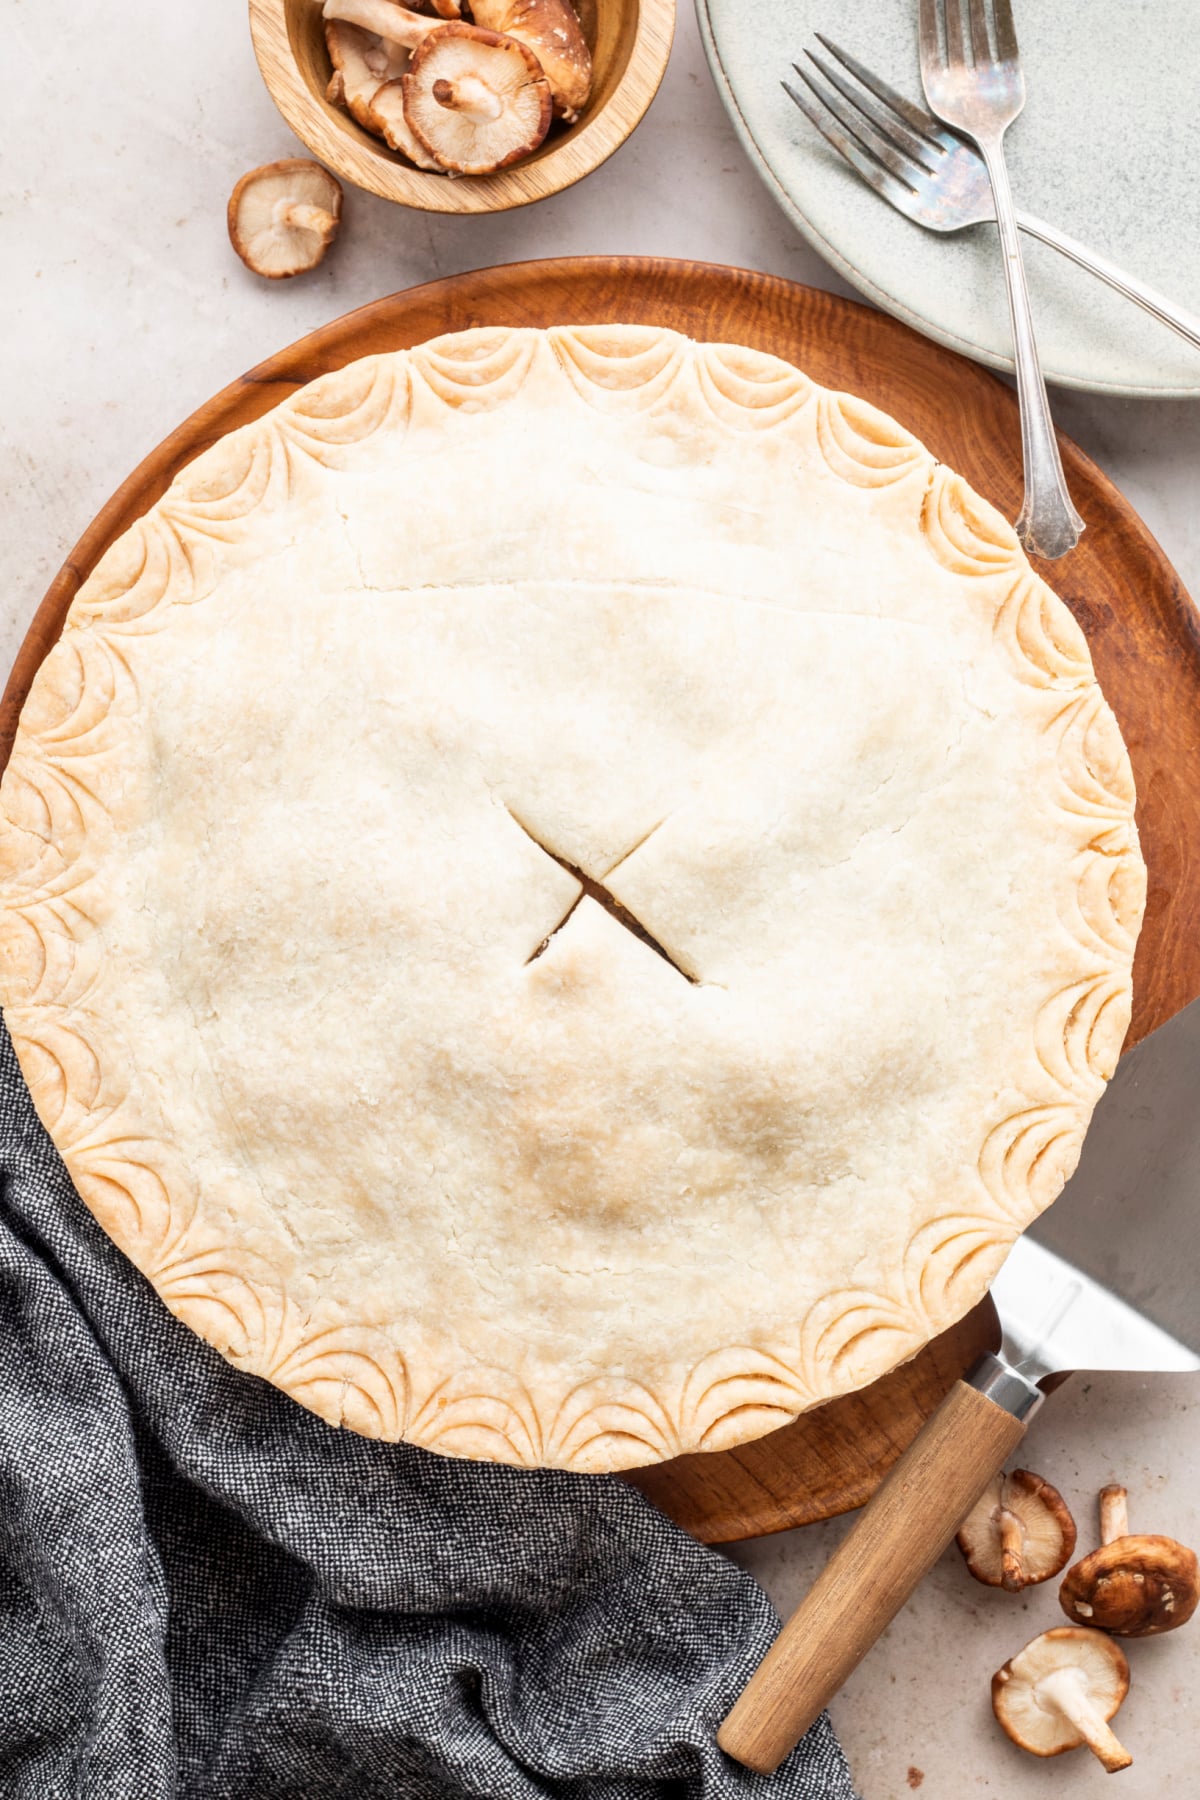 Overhead view of a whole baked pie with a golden tan top crust with a slice in the middle and decorated edging. A grew cloth napkin sits on the side, along with a pie cutter, a stack of plates with forks, and a small wooden bowl of mushrooms, indicating the filling of this savory pie.